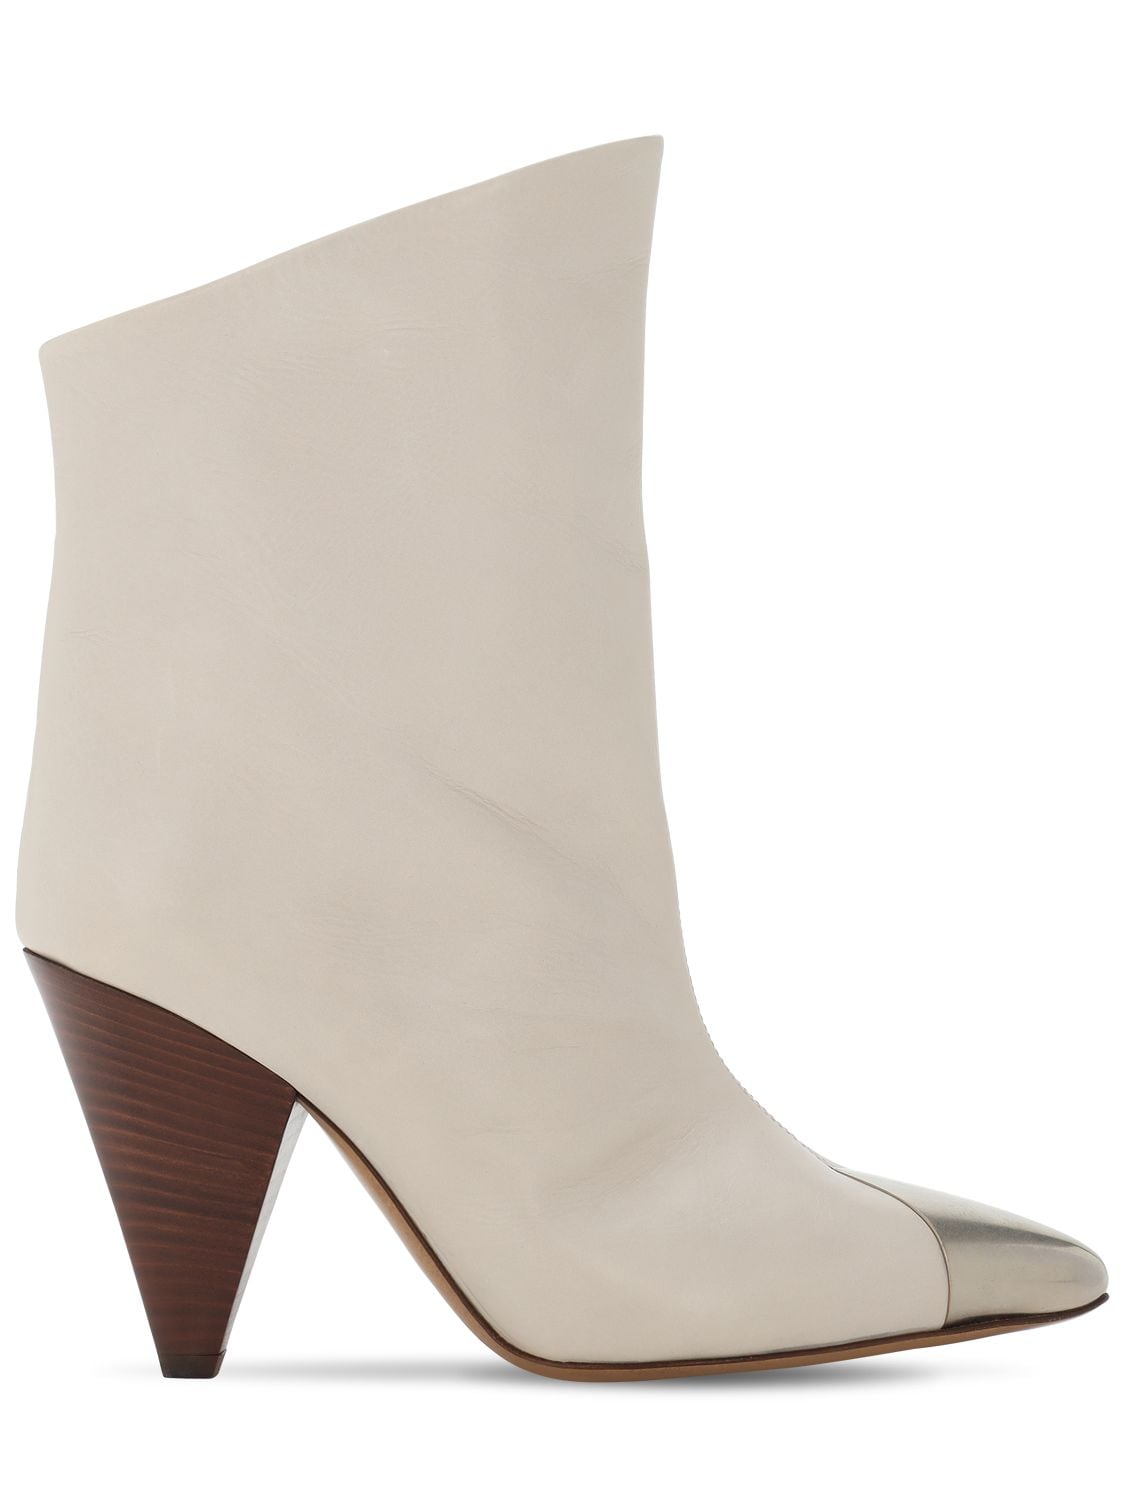 ISABEL MARANT 90MM LAPEE LEATHER ANKLE BOOTS,73IE1C001-MJBXSA2